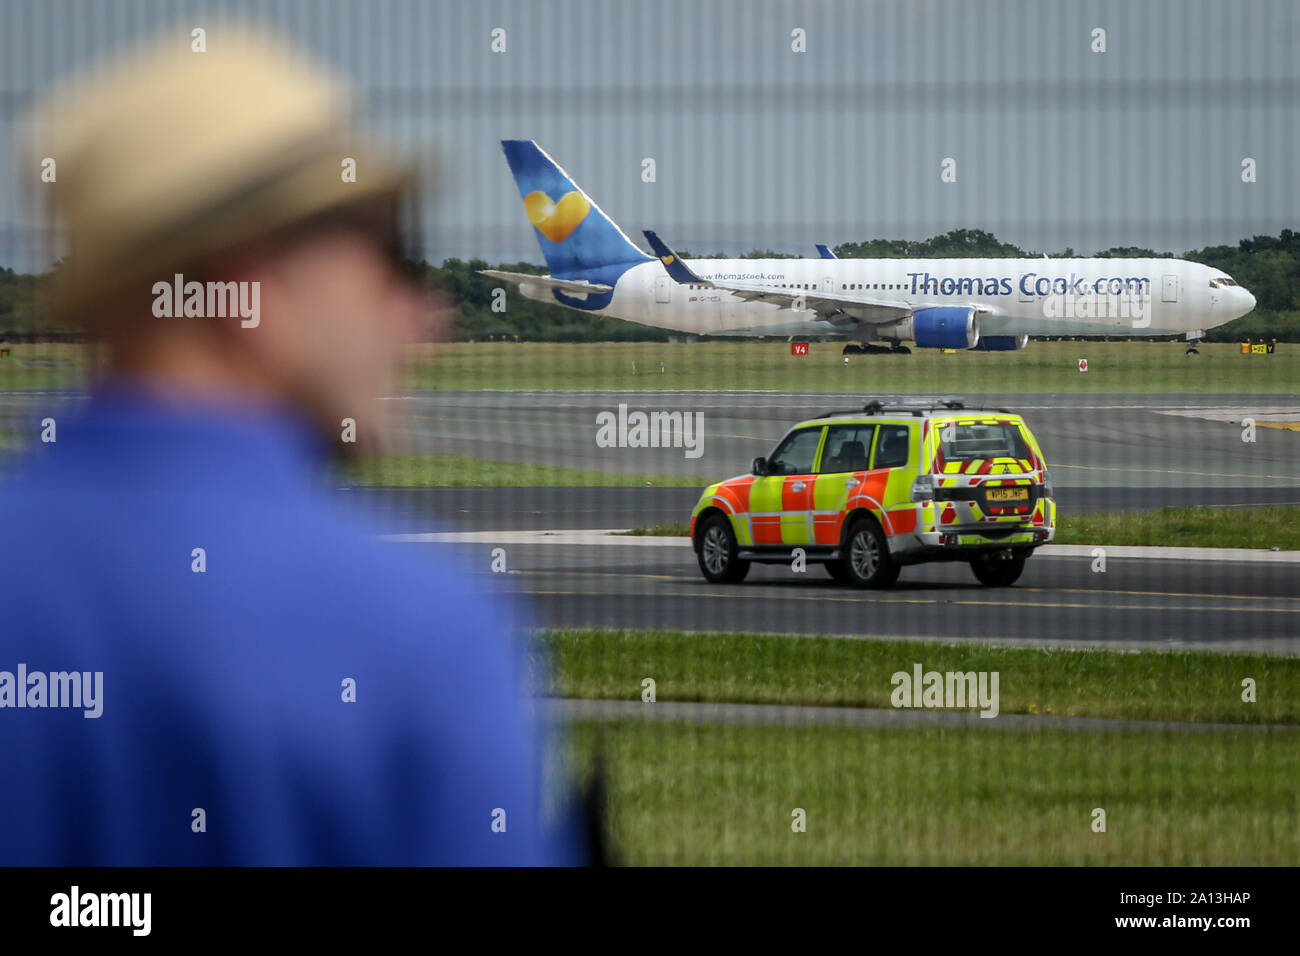 (File image) Thomas Cook Boeing-767 jetliner departs Manchester International Airport, Great Britain. As reported on Monday, 23 Sep 2019, Thomas Cook Group Plc, the 178-year travel company that became one of the U.K.’s best-known brands, has collapsed under a pile of debt, leaving tens of thousands of British tourists stranded across Europe. Stock Photo